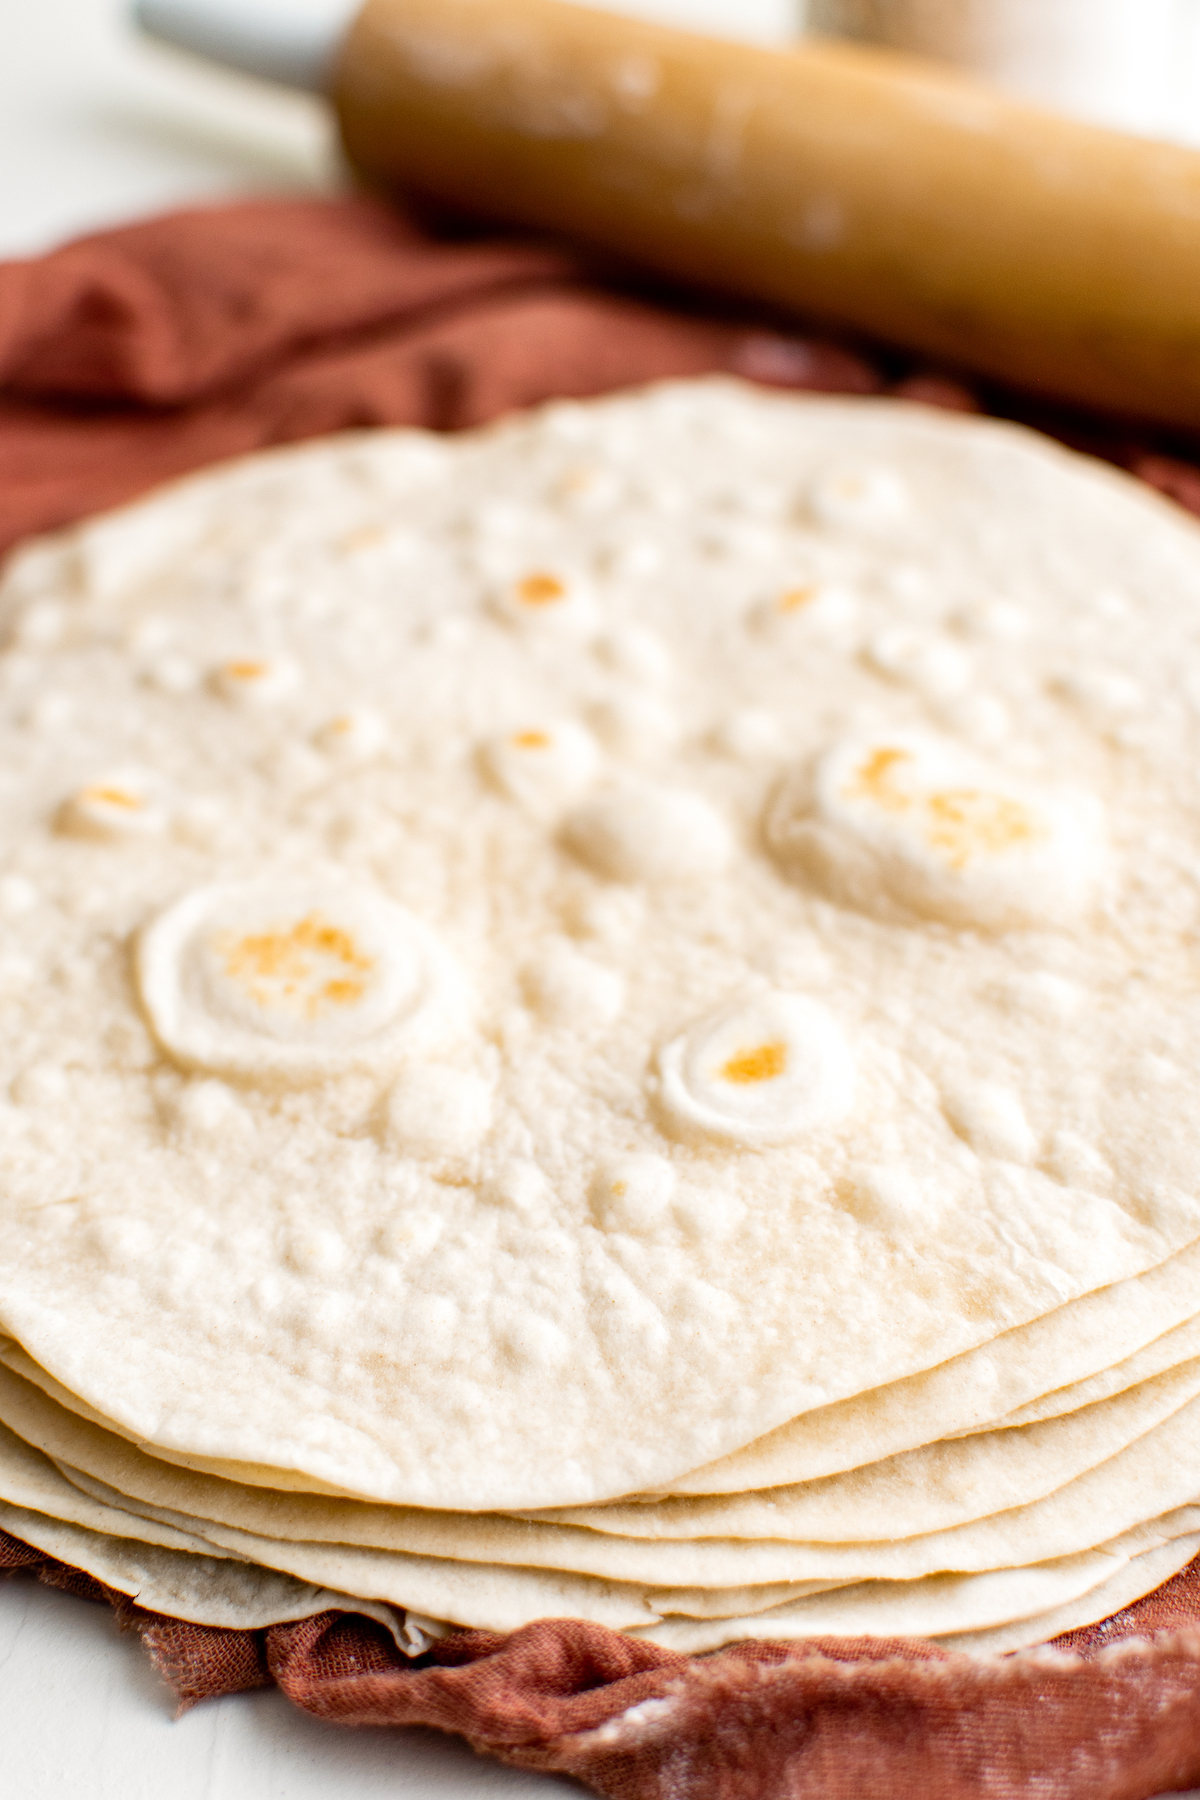 Cooked tortillas in a stack next to a rolling pin and napkin.